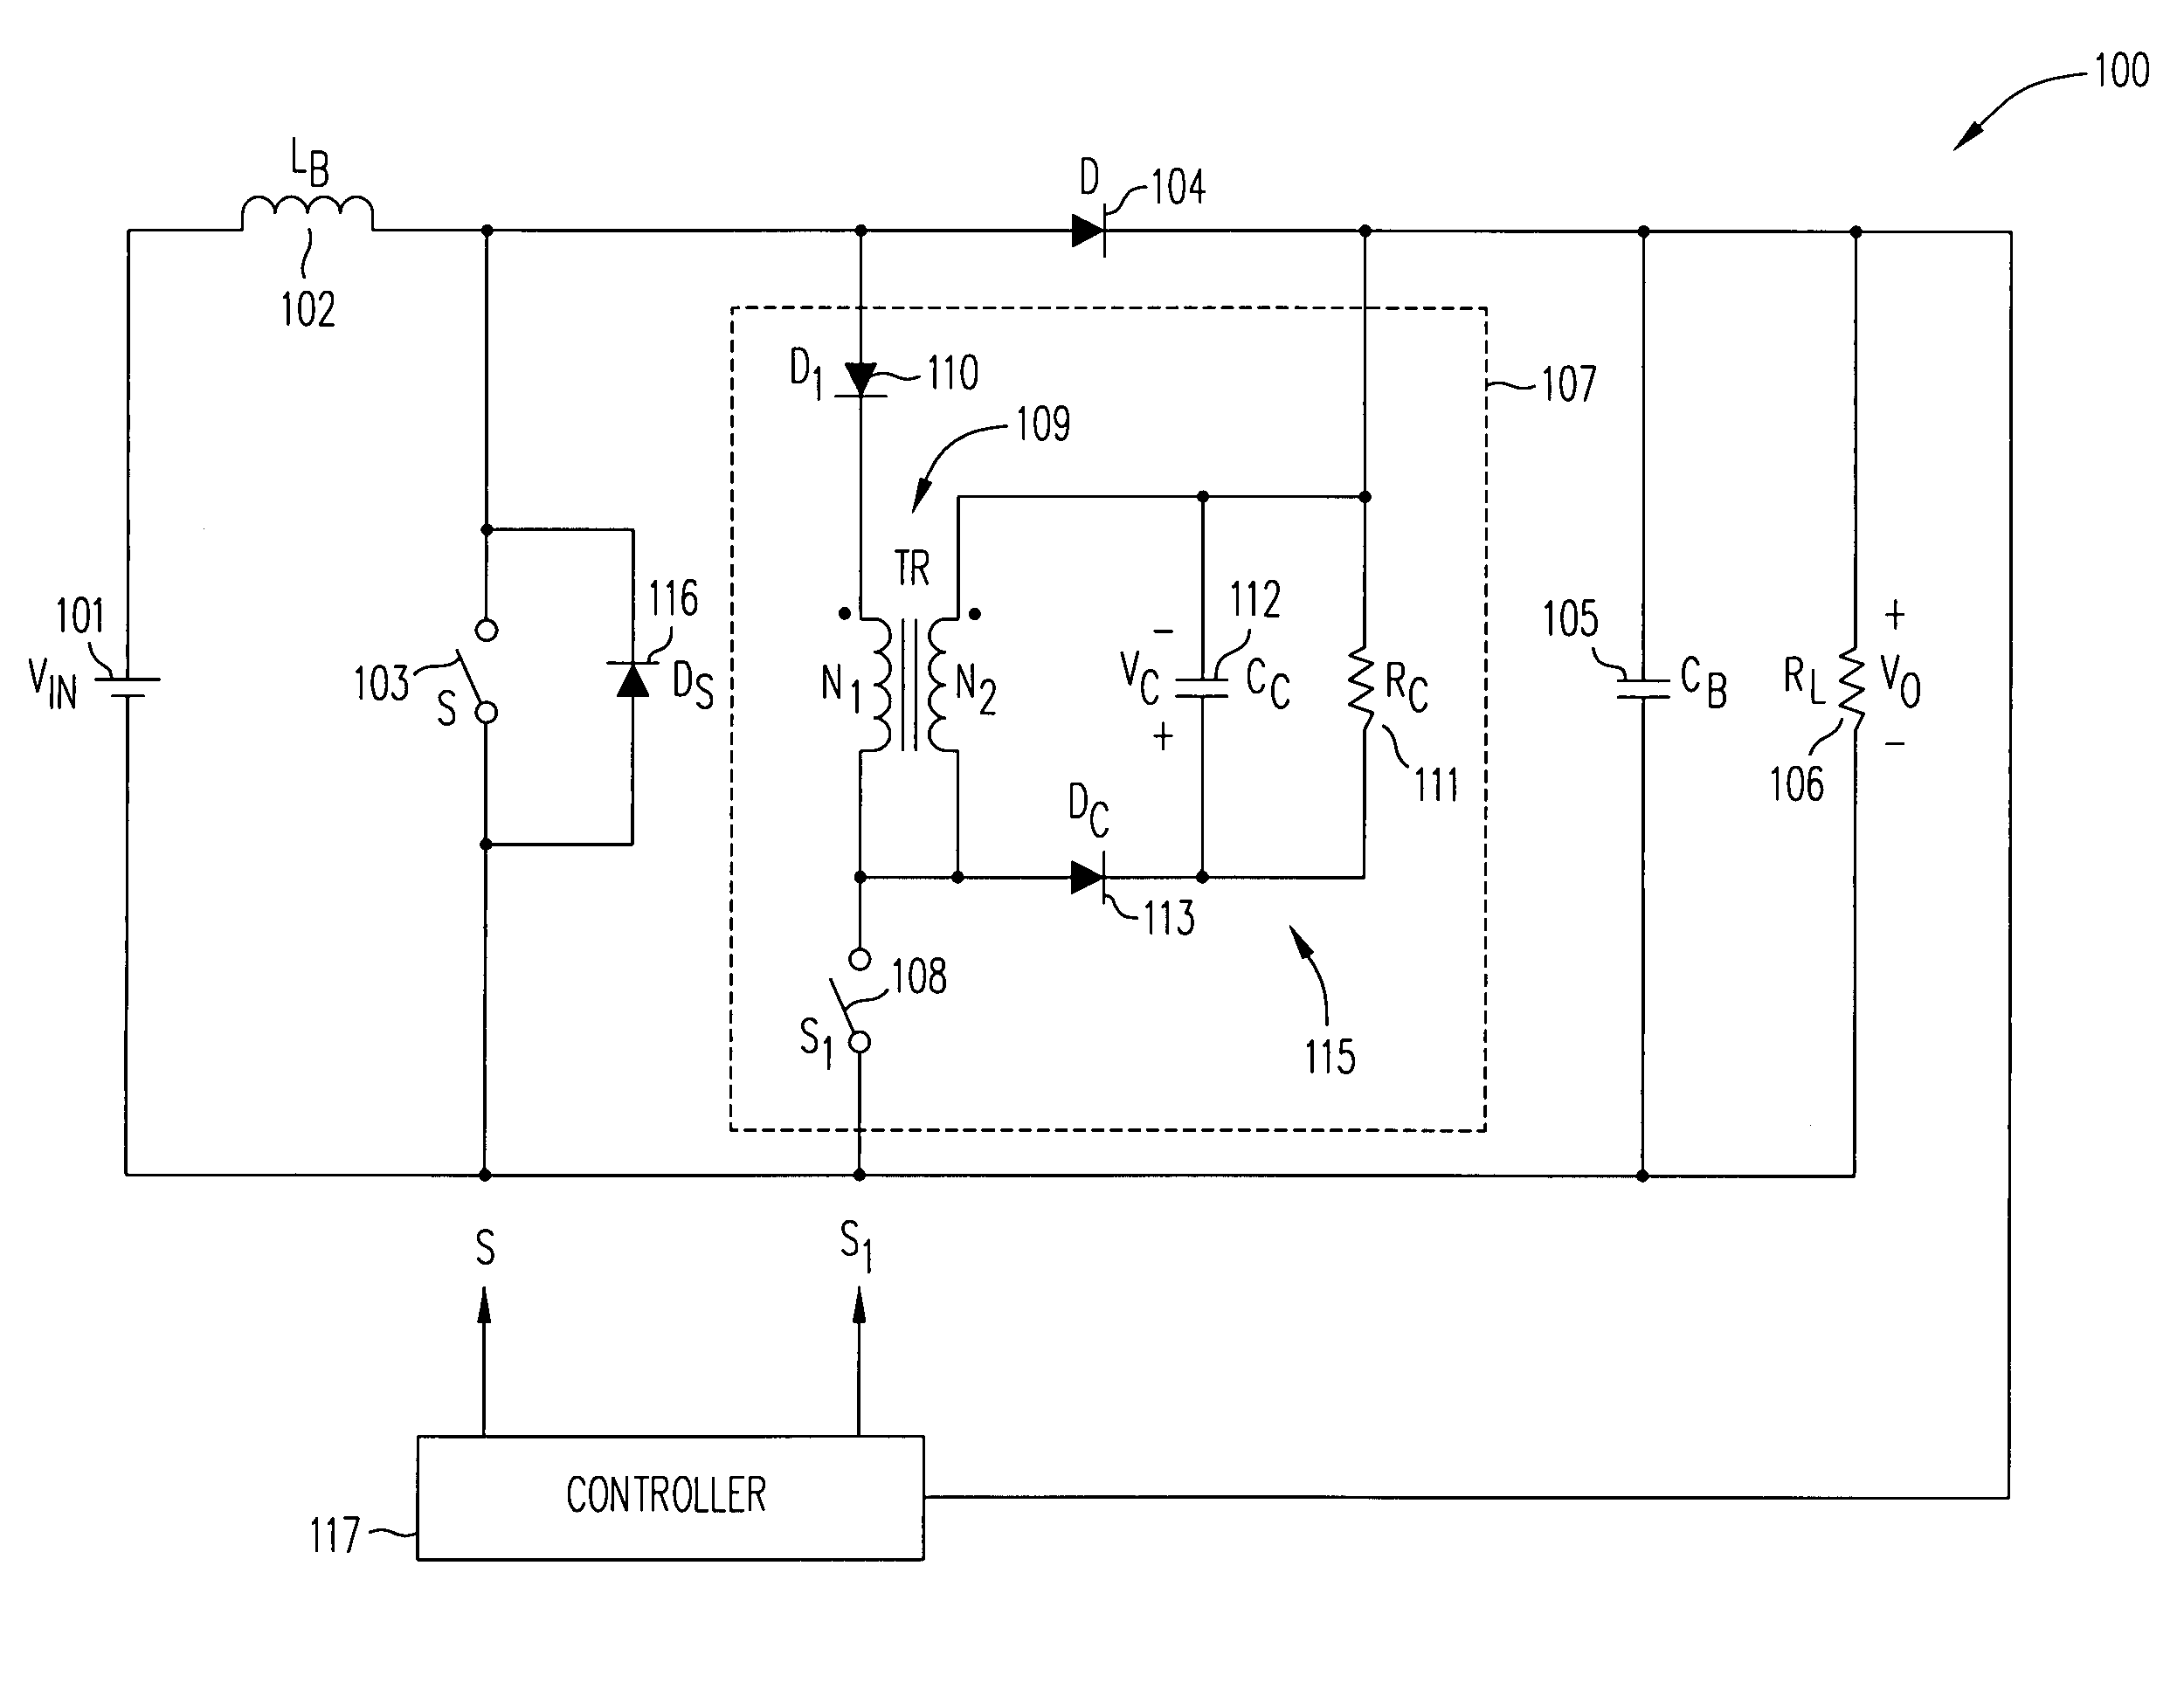 Soft-switched power converters